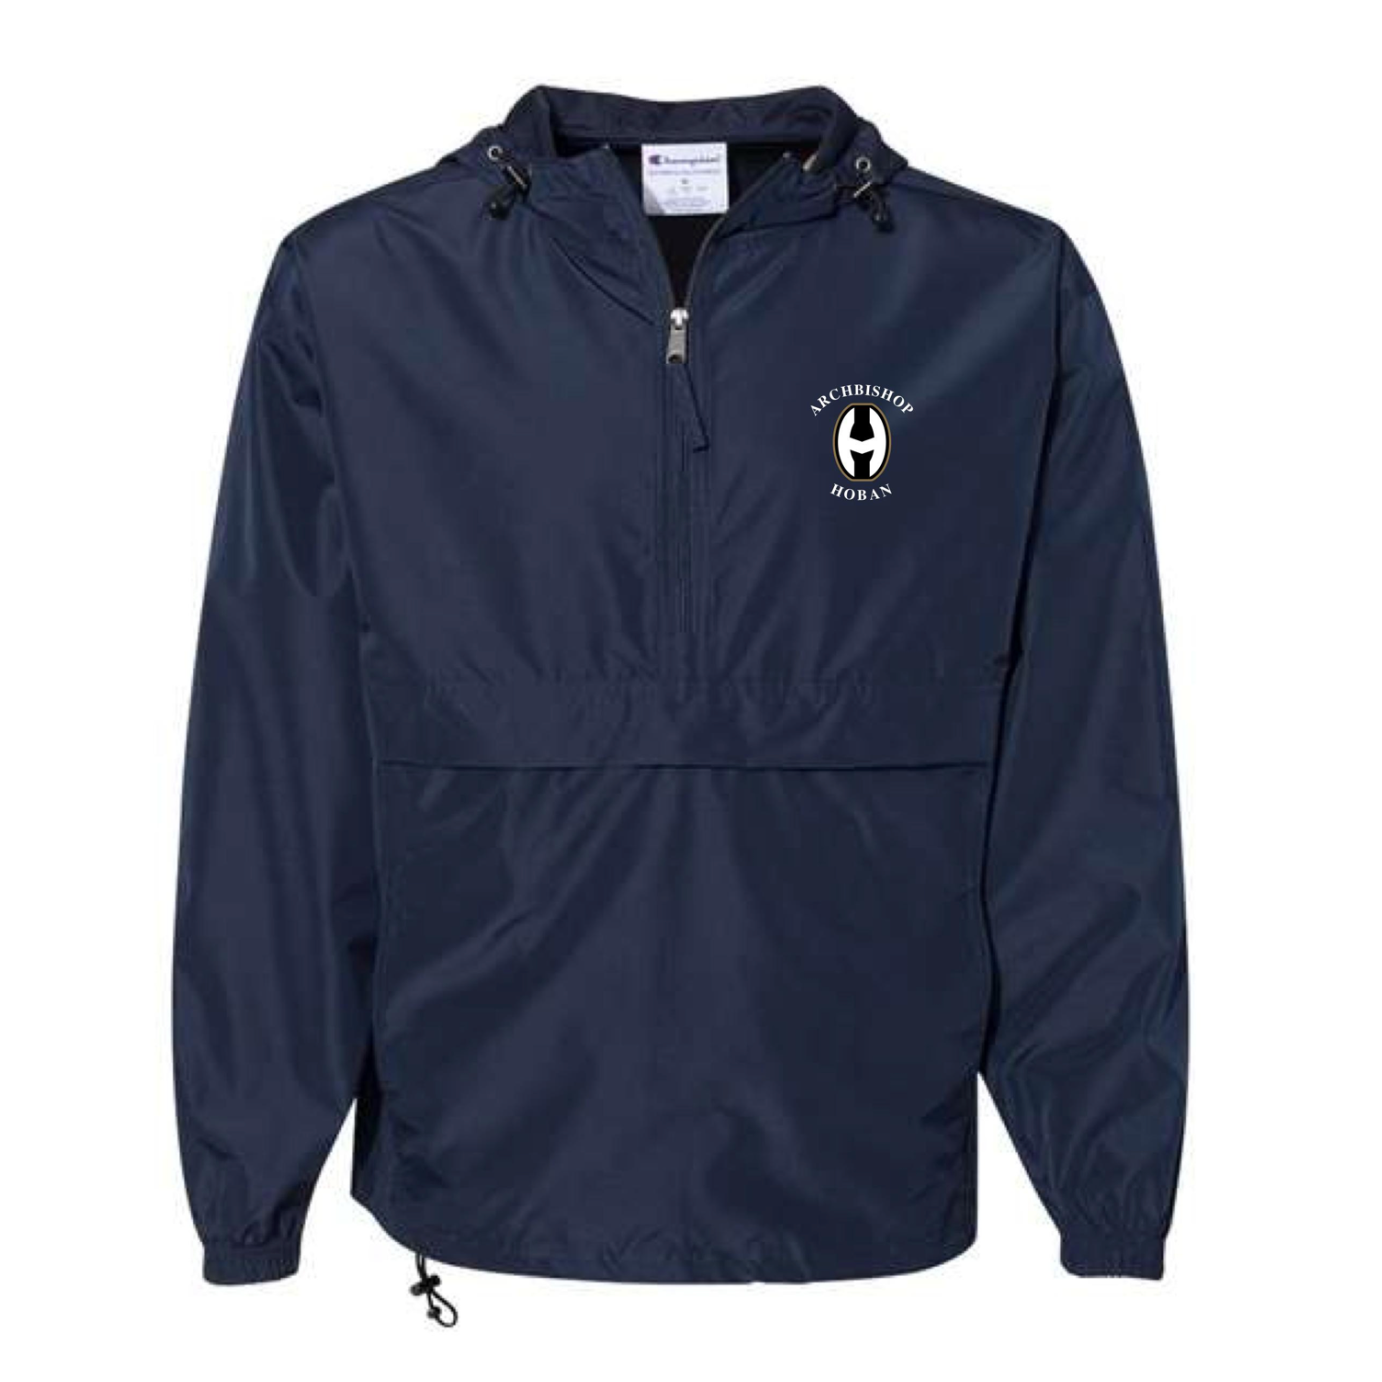 Unisex Pack N' Go 1/2 Zip by Champion (click for more color options)